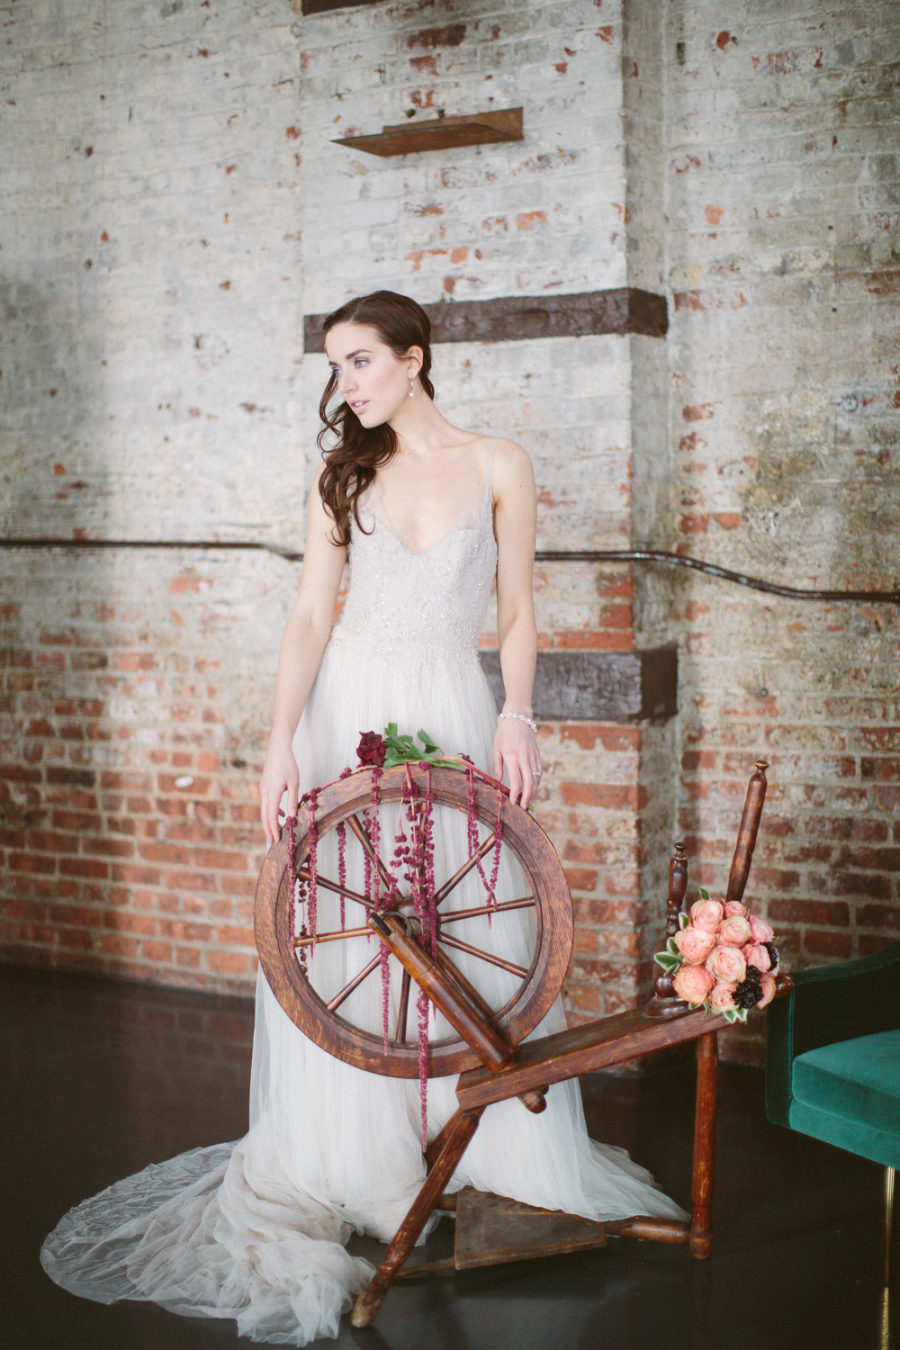 Sleeping Beauty themed bridal shot with a spinning wheel placed in the lounge